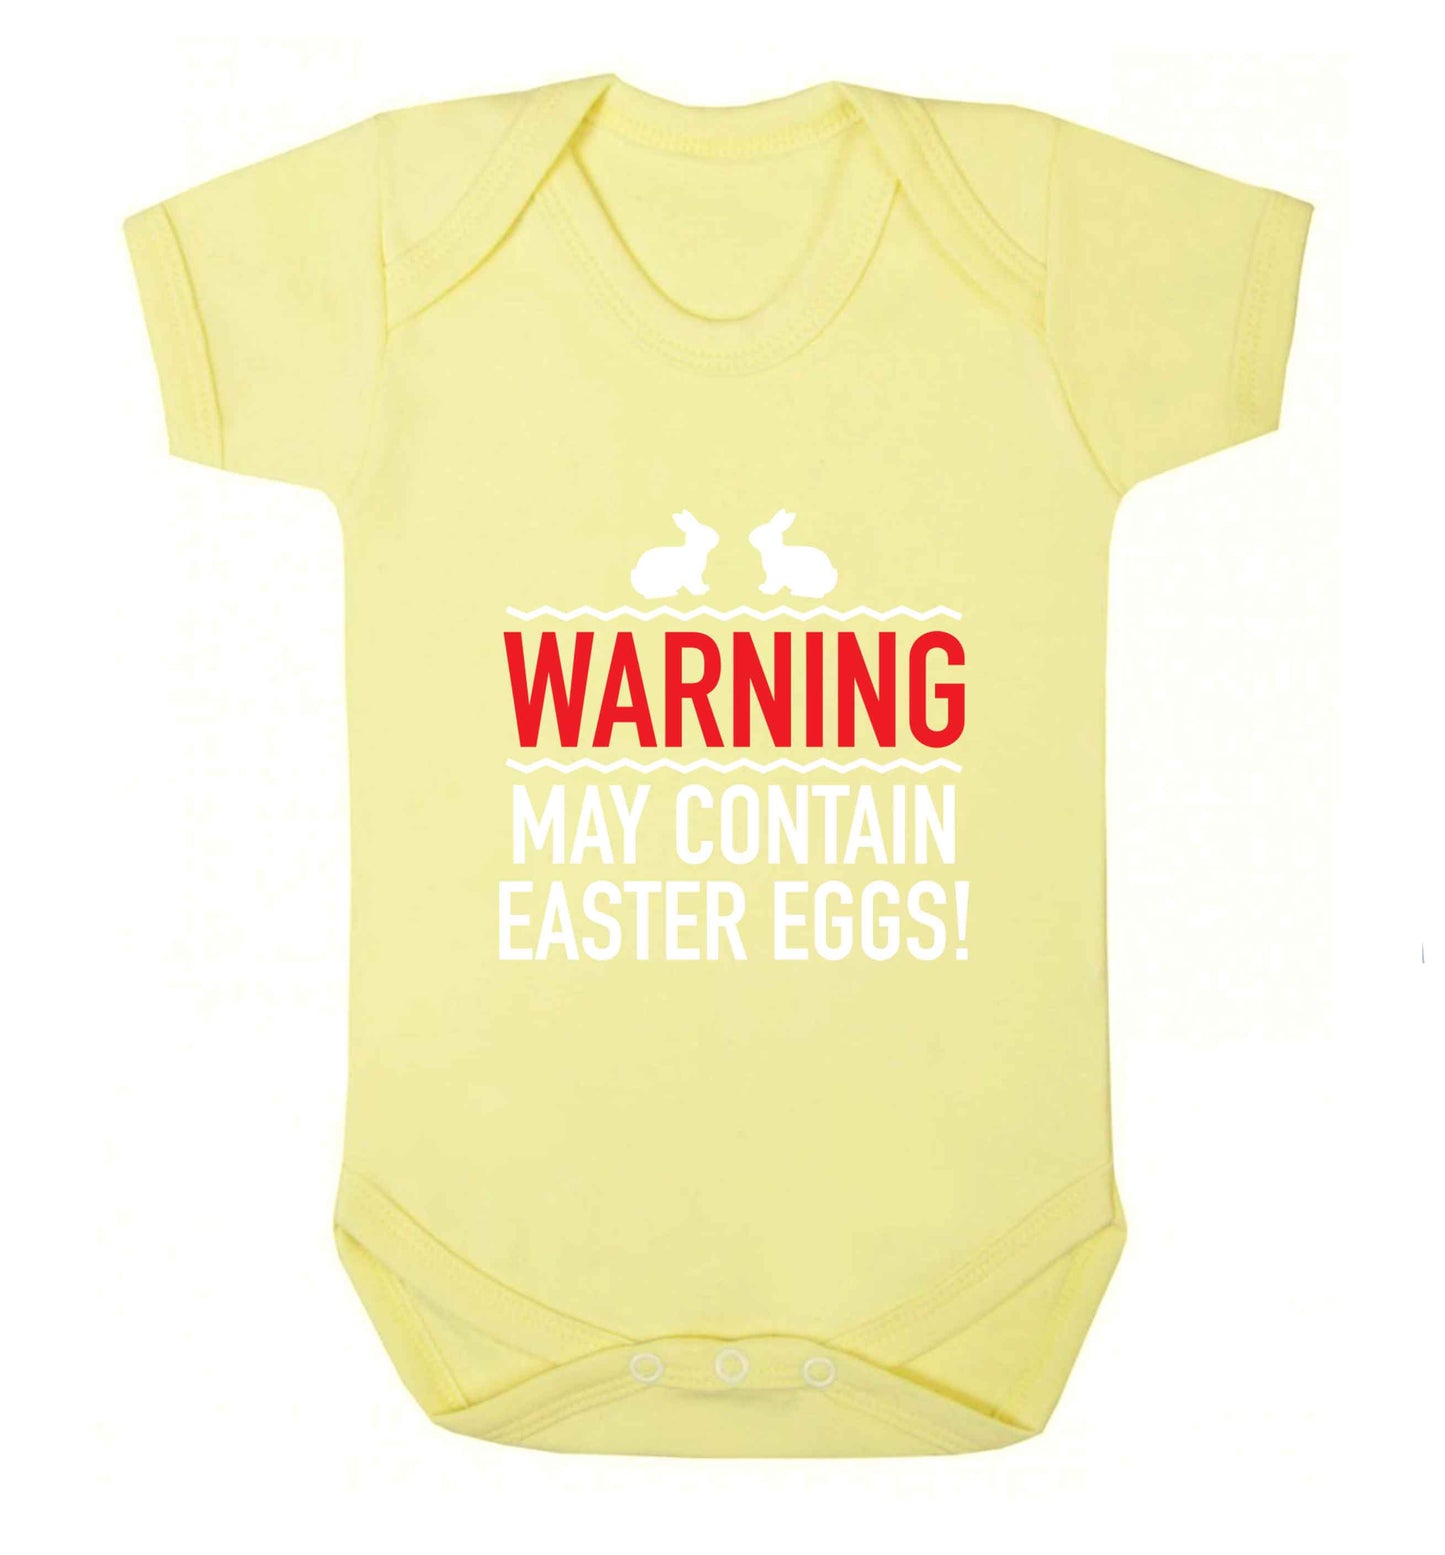 Warning may contain Easter eggs baby vest pale yellow 18-24 months